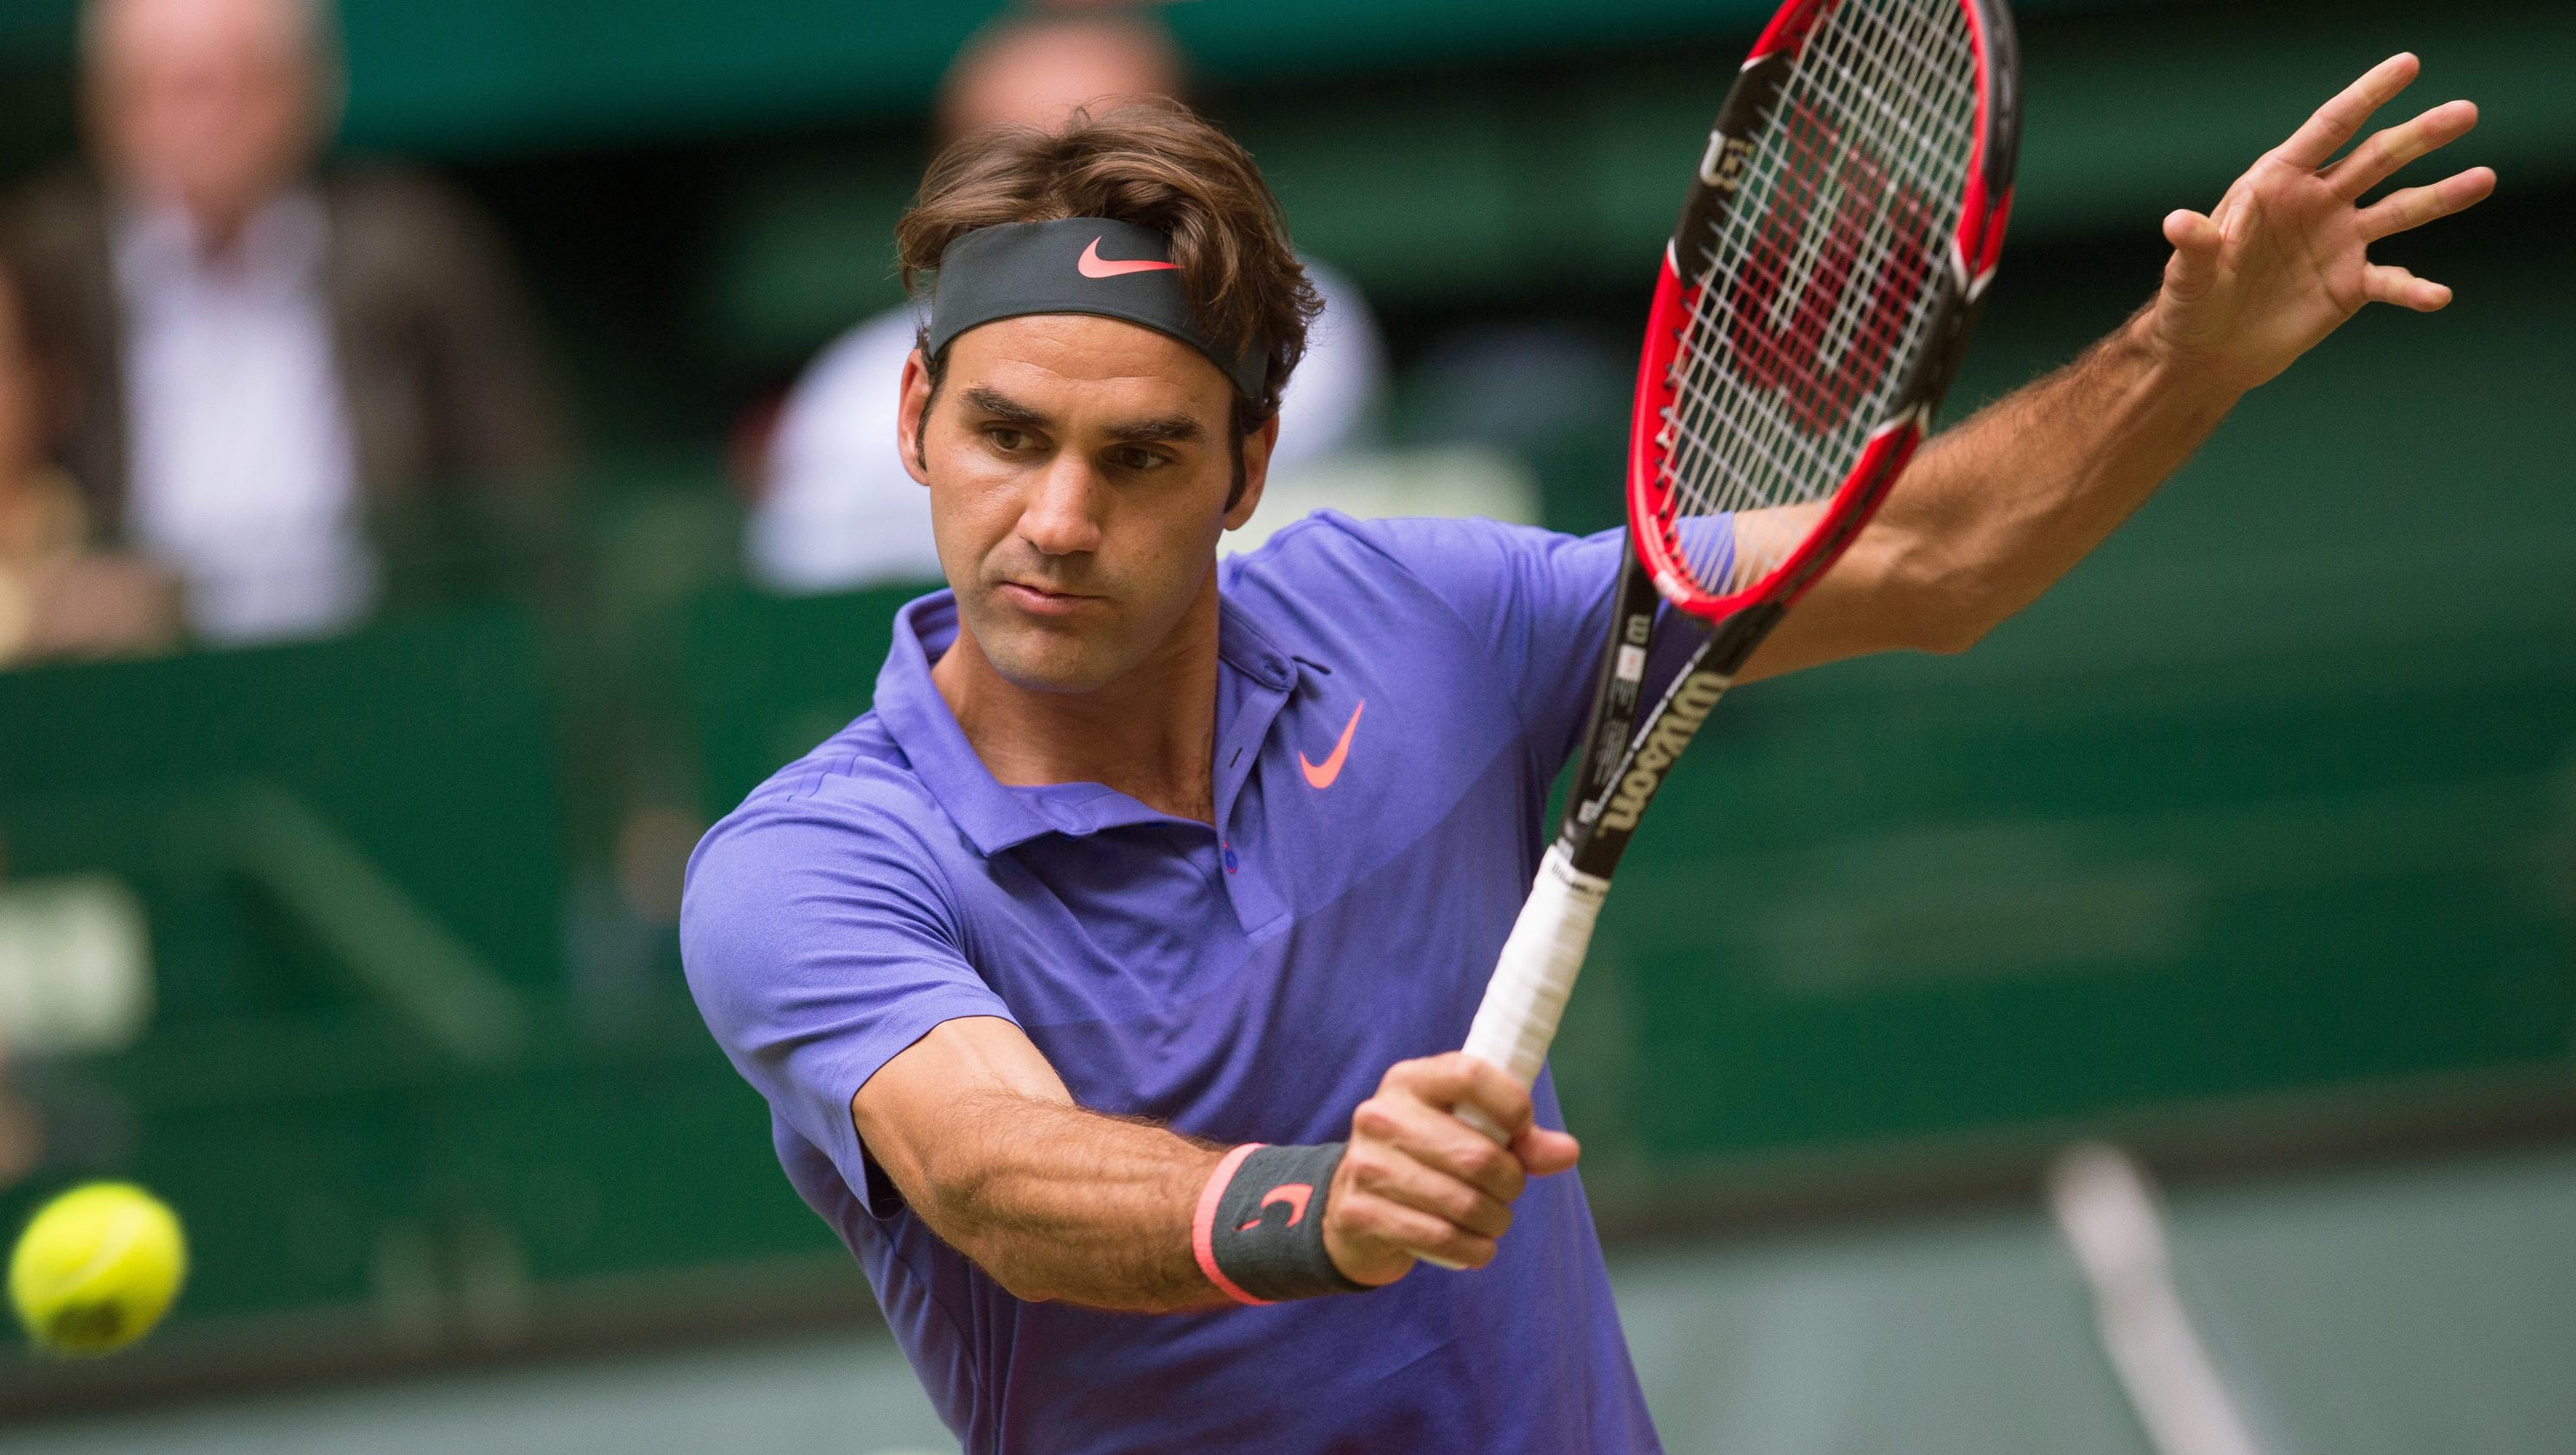 Roger Federer feels good about his shot at Wimbledon title3200 x 1680